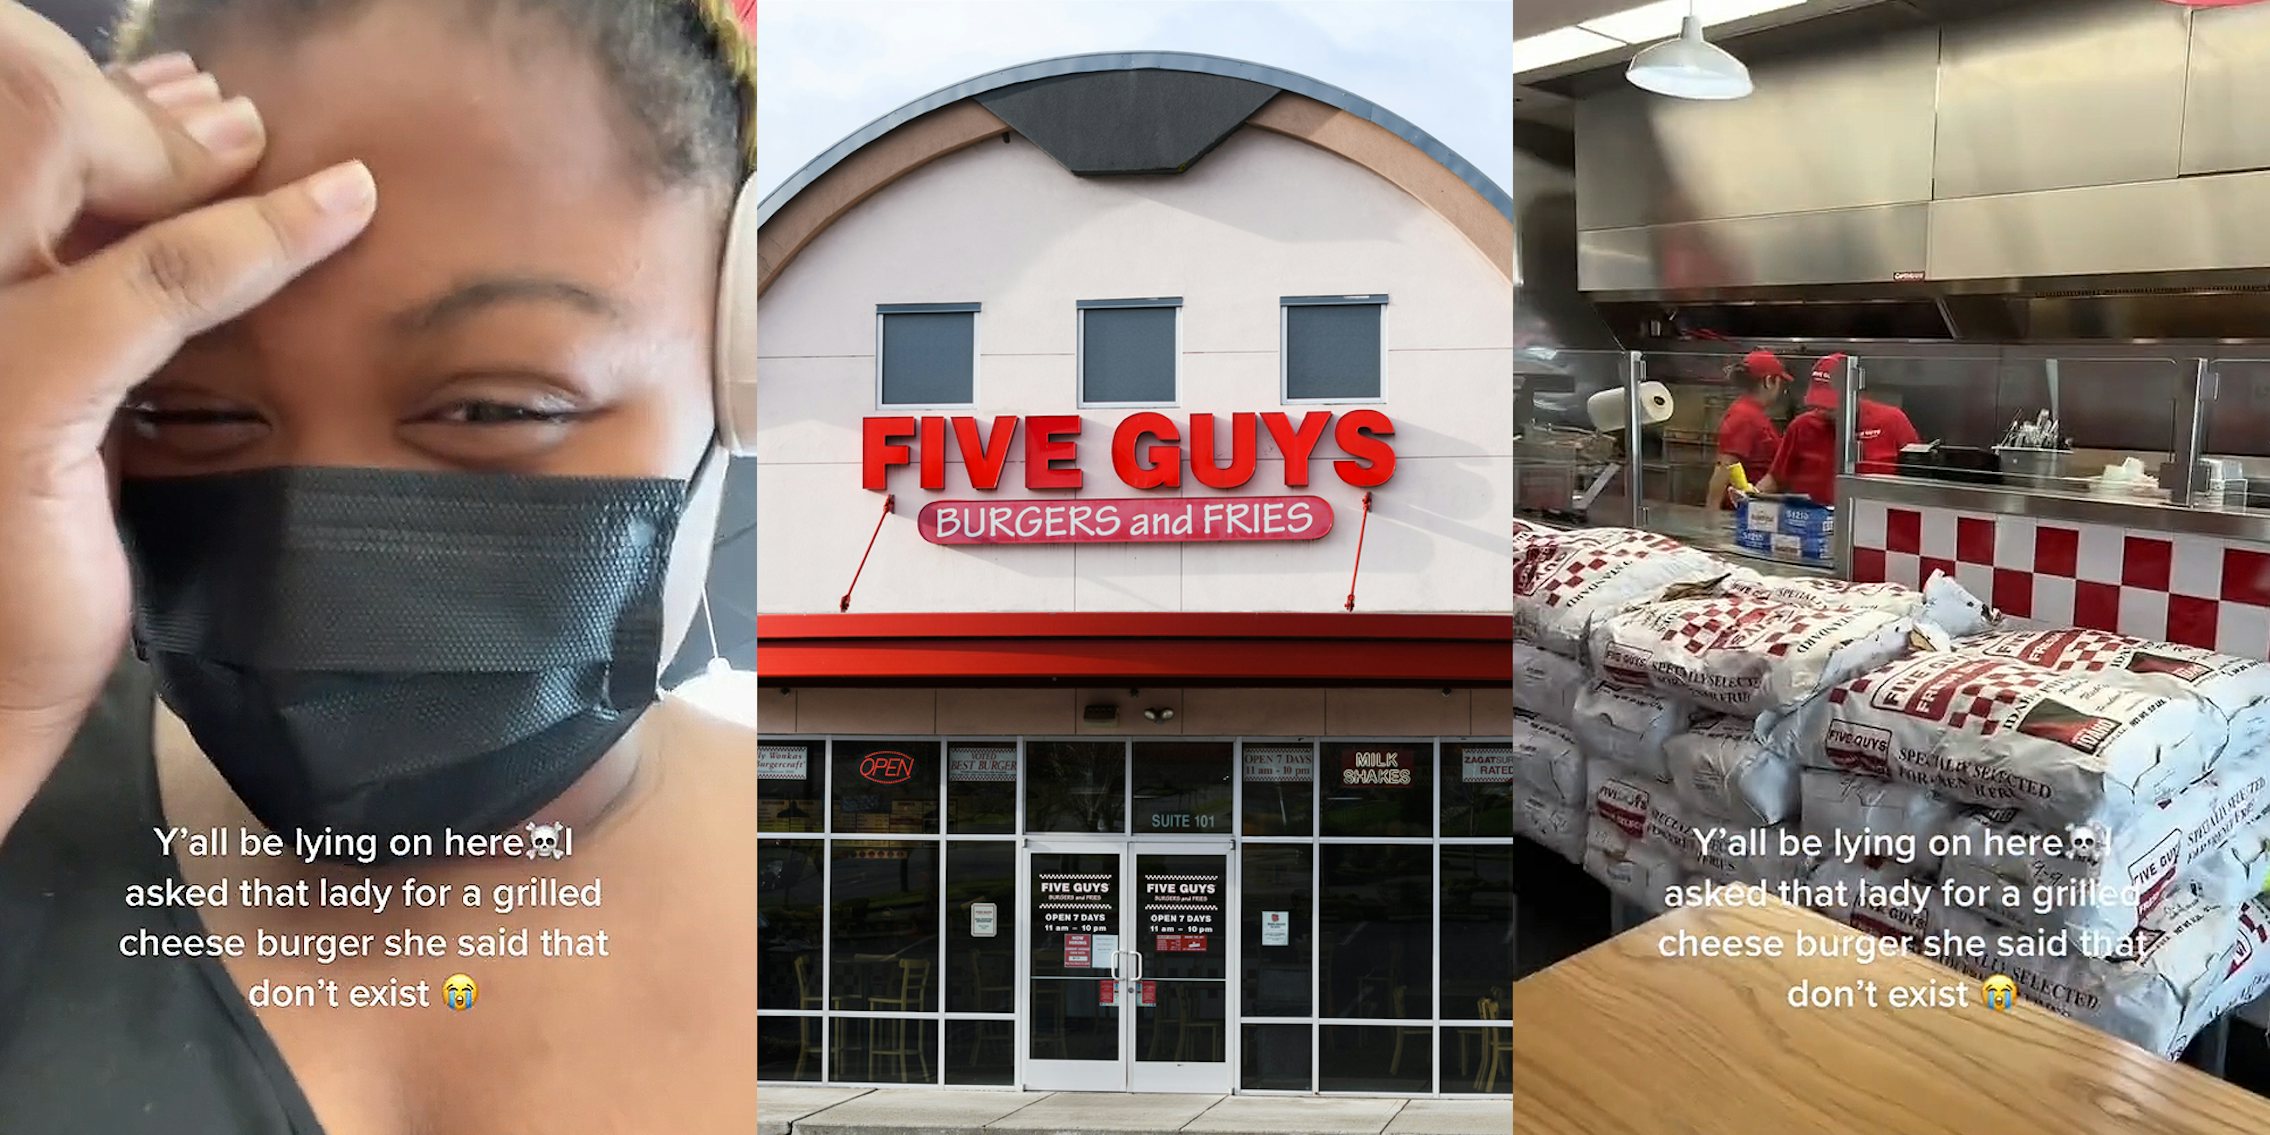 woman with mask on at Five Guys restaurant laughing with hand on forehead caption 'Y'all be lying on here I asked that lady for a grilled cheese burger she said that don't exist' (l) Five Guys sign on building (c) Five Guys restaurant interior with workers caption 'Y'all be lying on here I asked that lady for a grilled cheese burger she said that don't exist' (r)